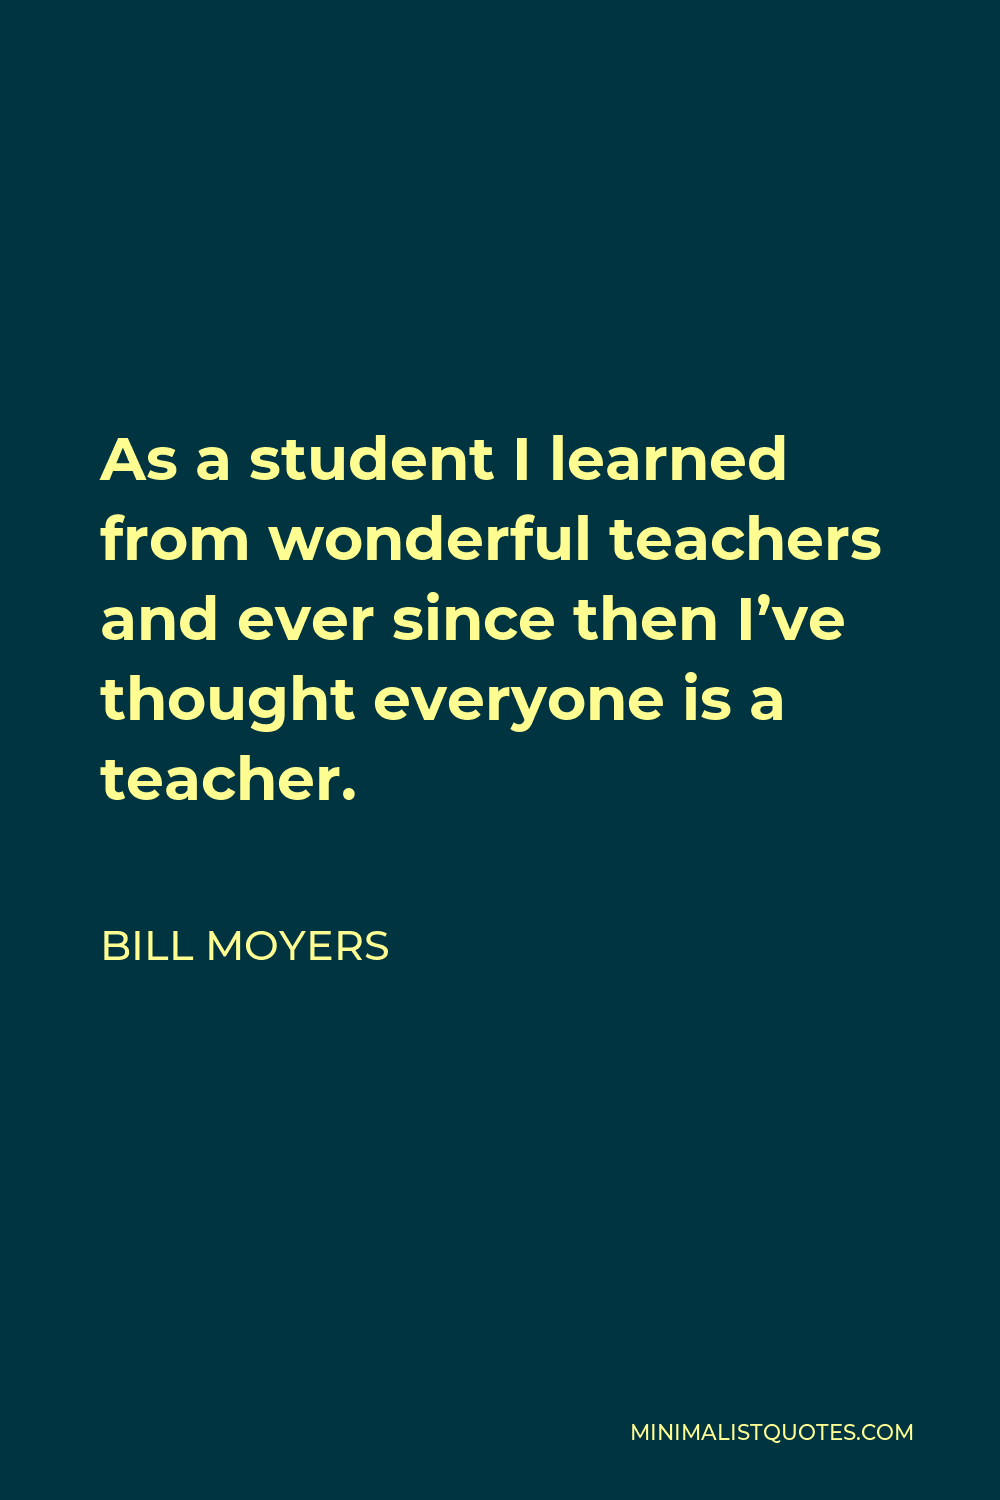 Bill Moyers Quote - As a student I learned from wonderful teachers and ever since then I’ve thought everyone is a teacher.